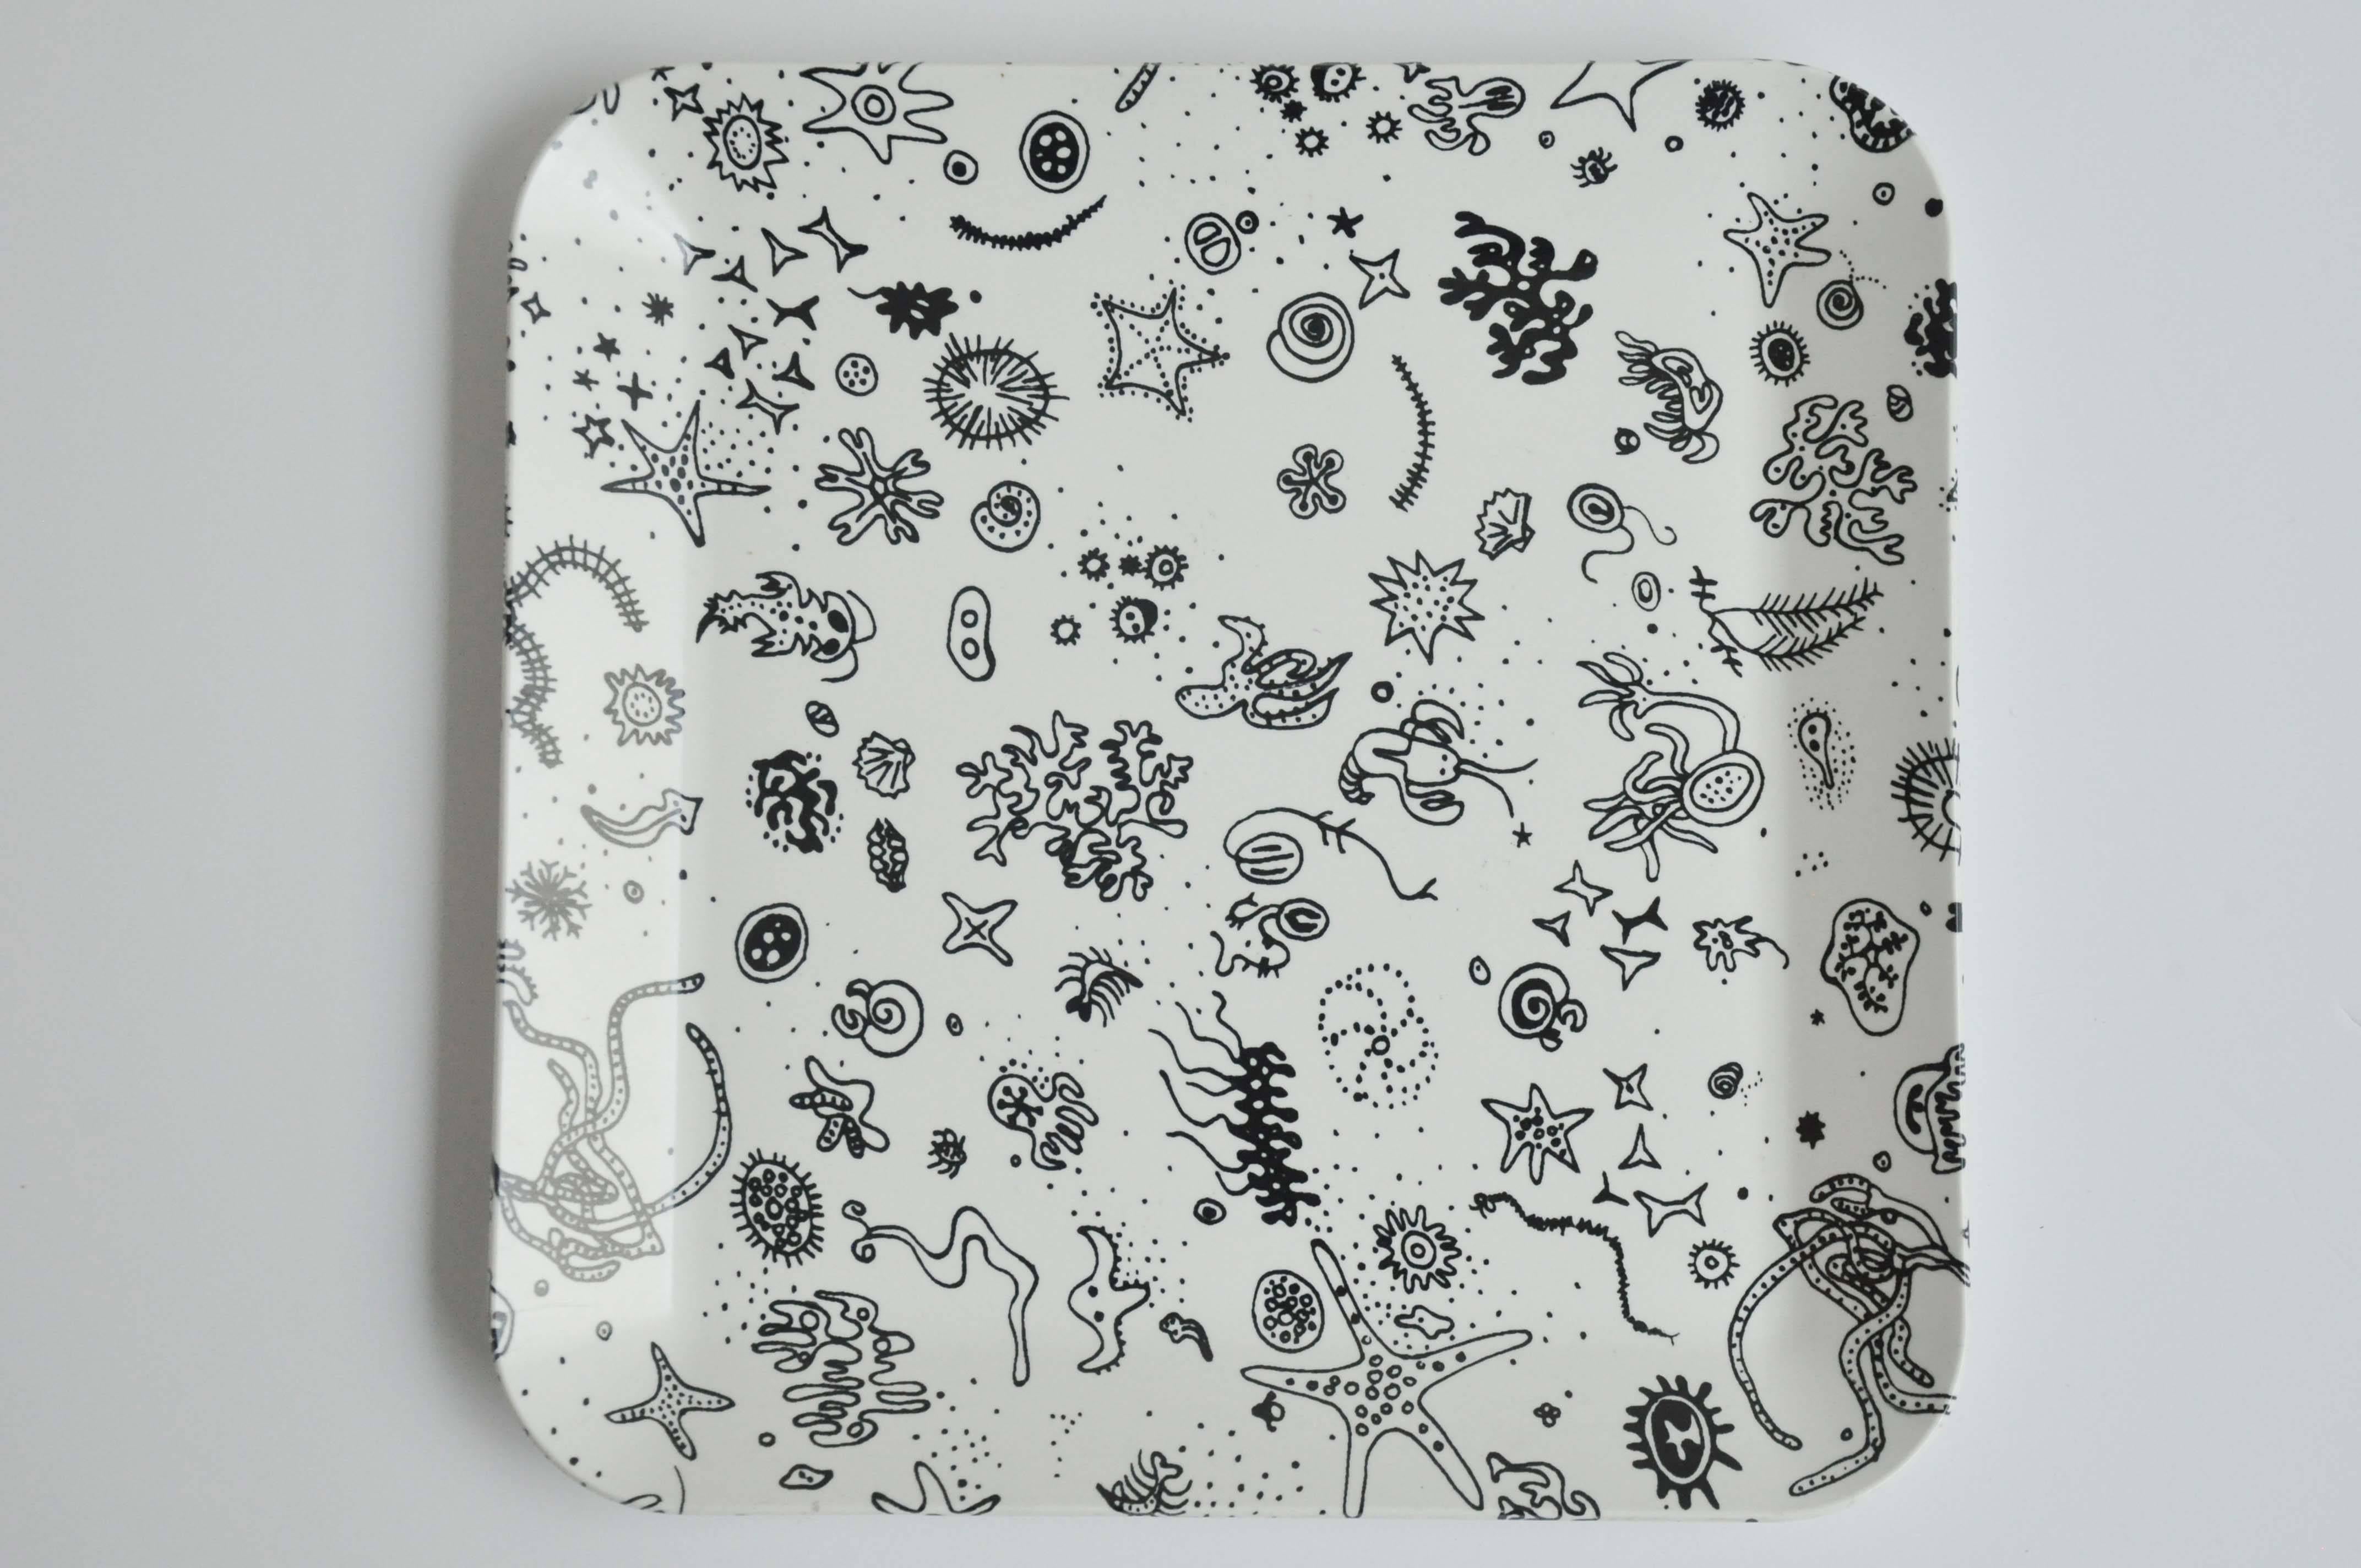 A rare, black and white plastic tray designed by Ray Eames, produced by Waverly Products in 1954. "Sea Things" was one of several fabric patterns designed by Ray for Schiffer Prints in 1950 for which she won a design award. An unusually